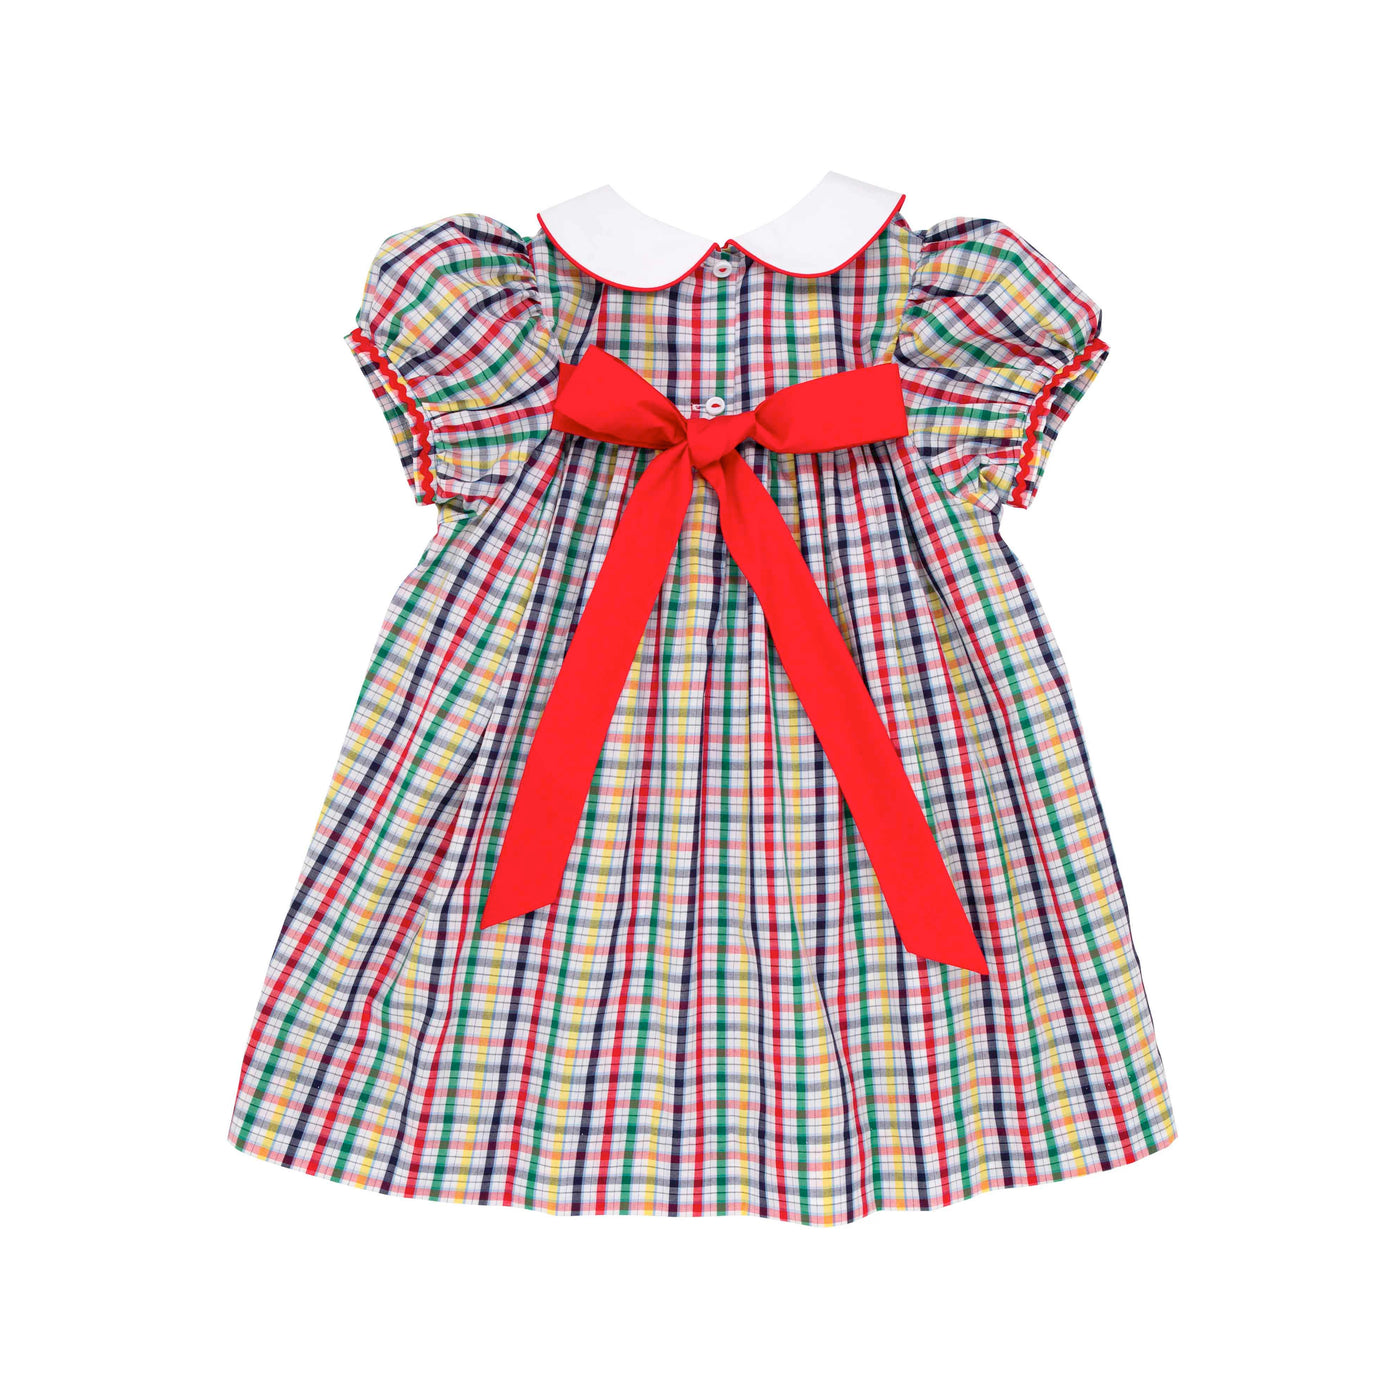 Mary Dal Dress - Potomac Plaid With Worth Avenue White & Richmond Red